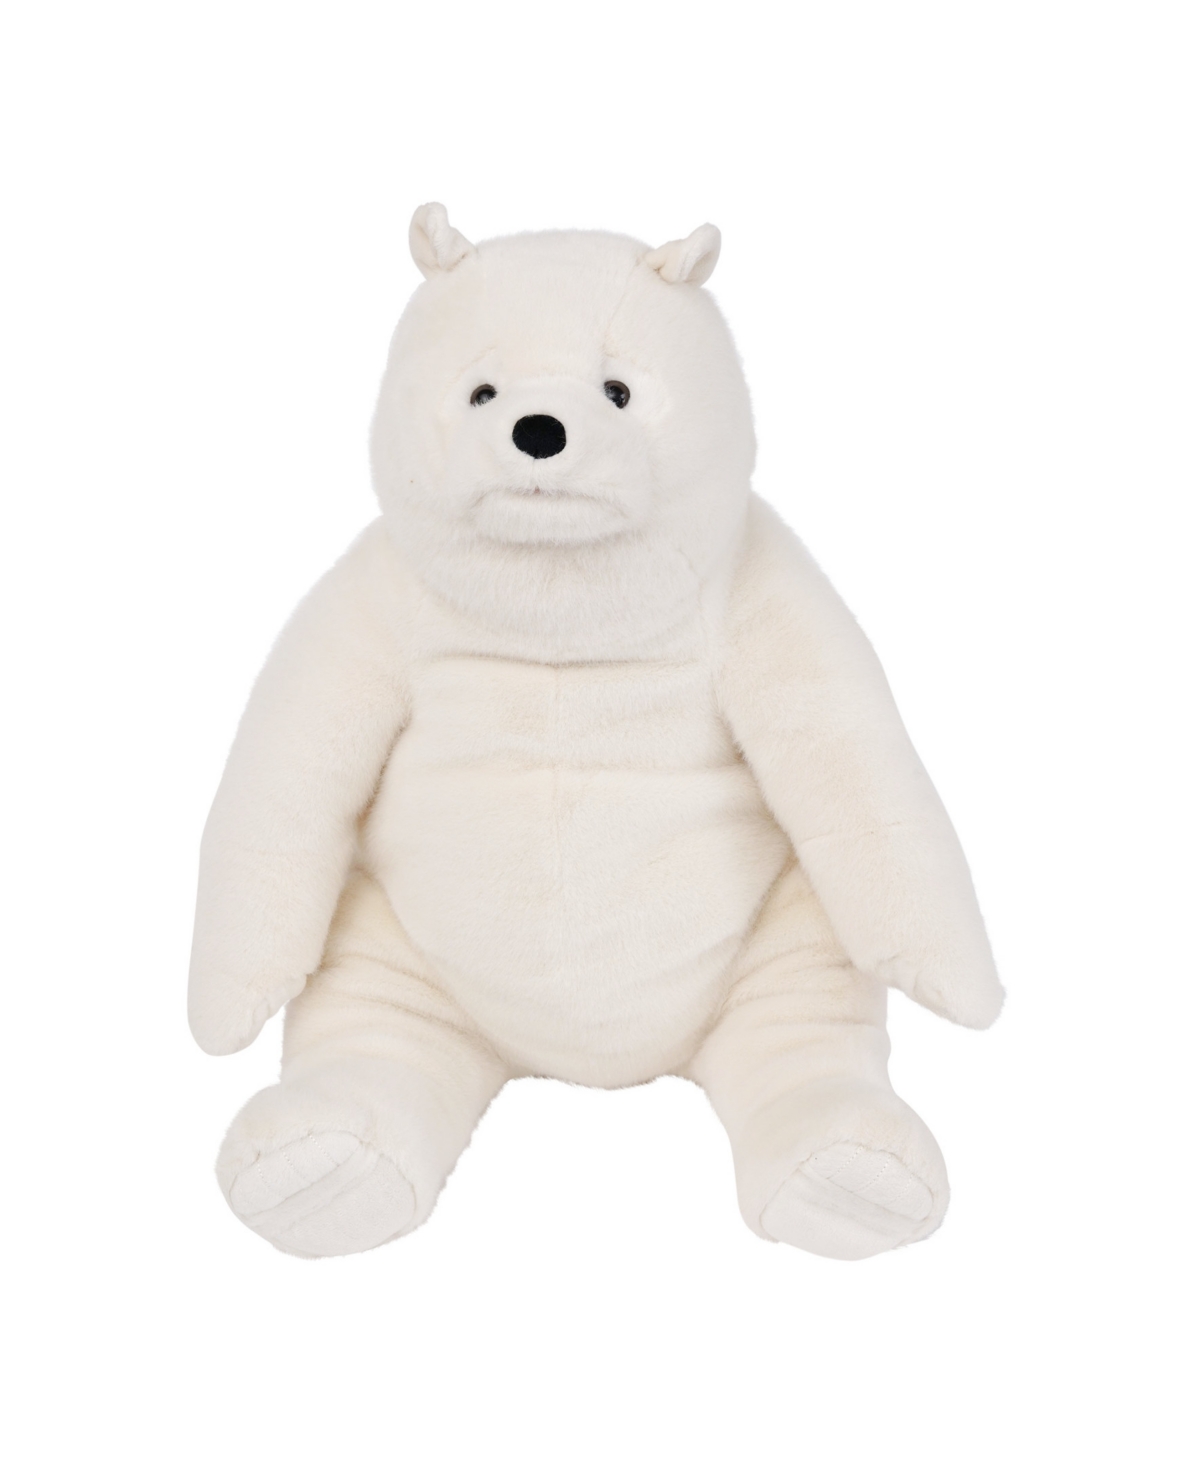 Manhattan Toy Company Kids' 18" Cream Kodiak Teddy Bear Plush Toy With Suede-like Paws In Multicolor